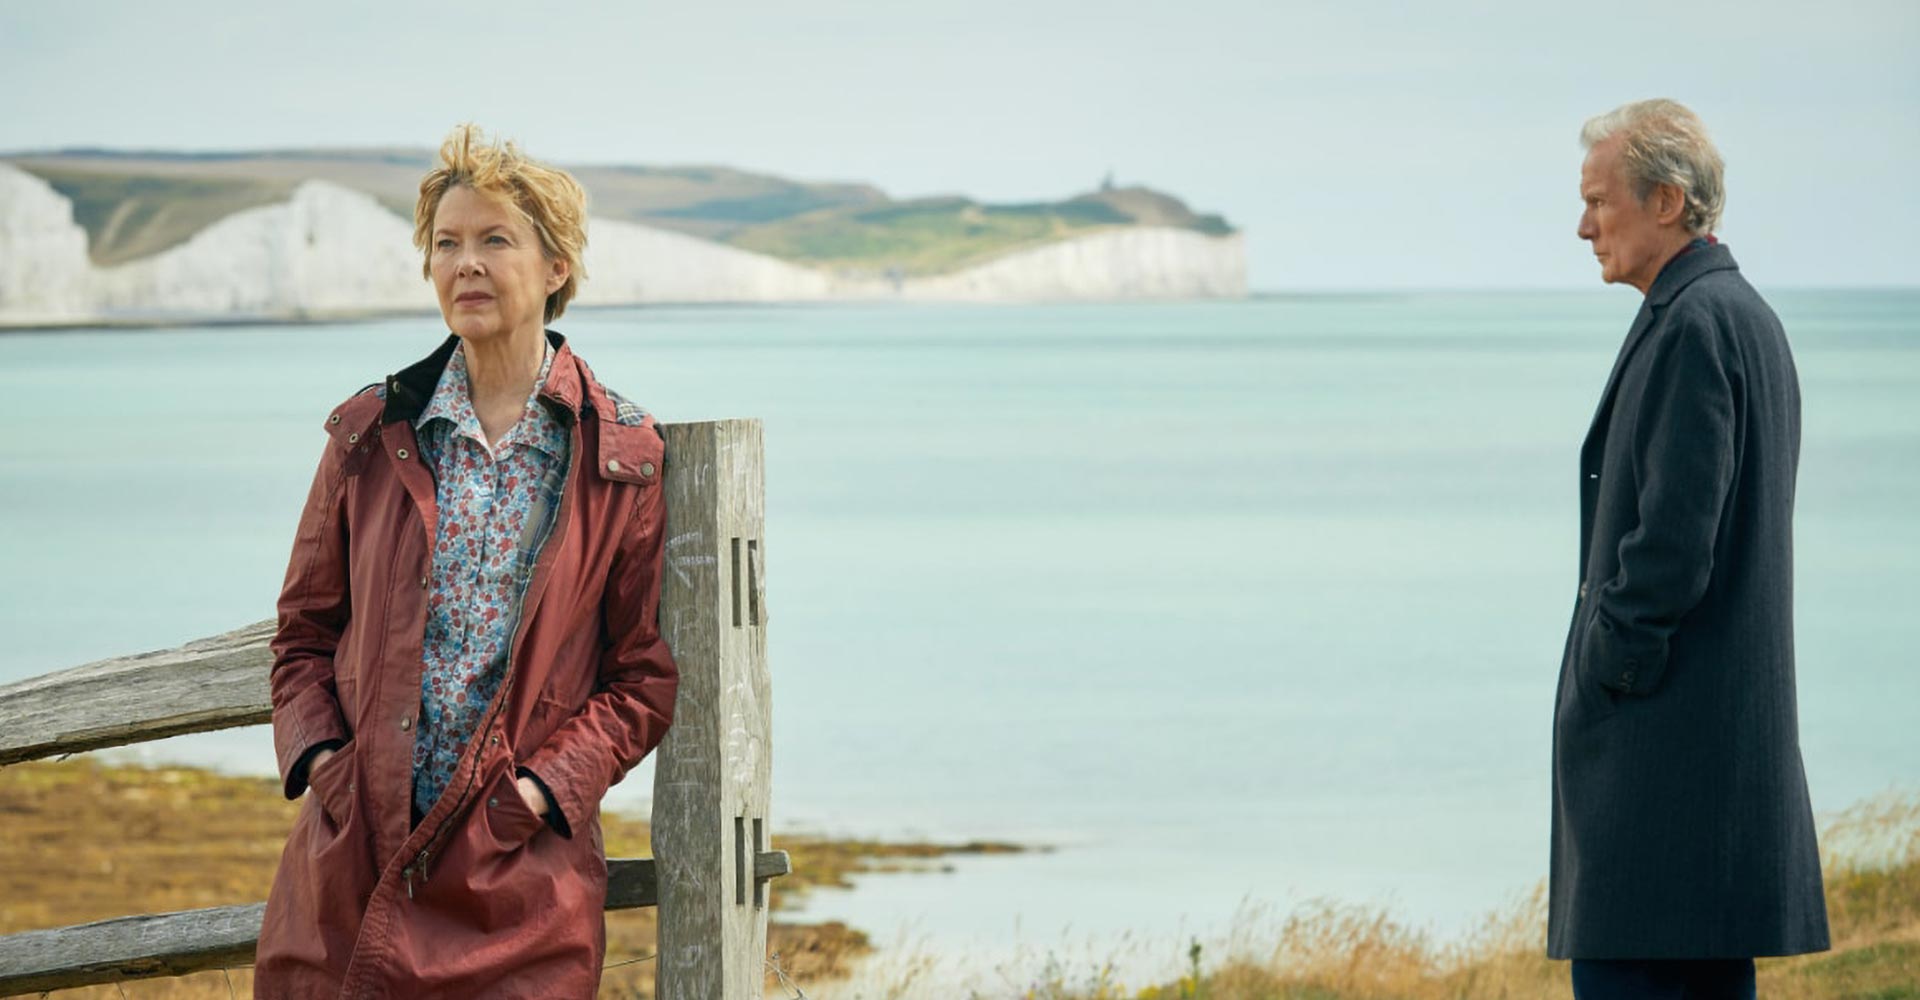 Annette Bening and Bill Nighy by the seaside